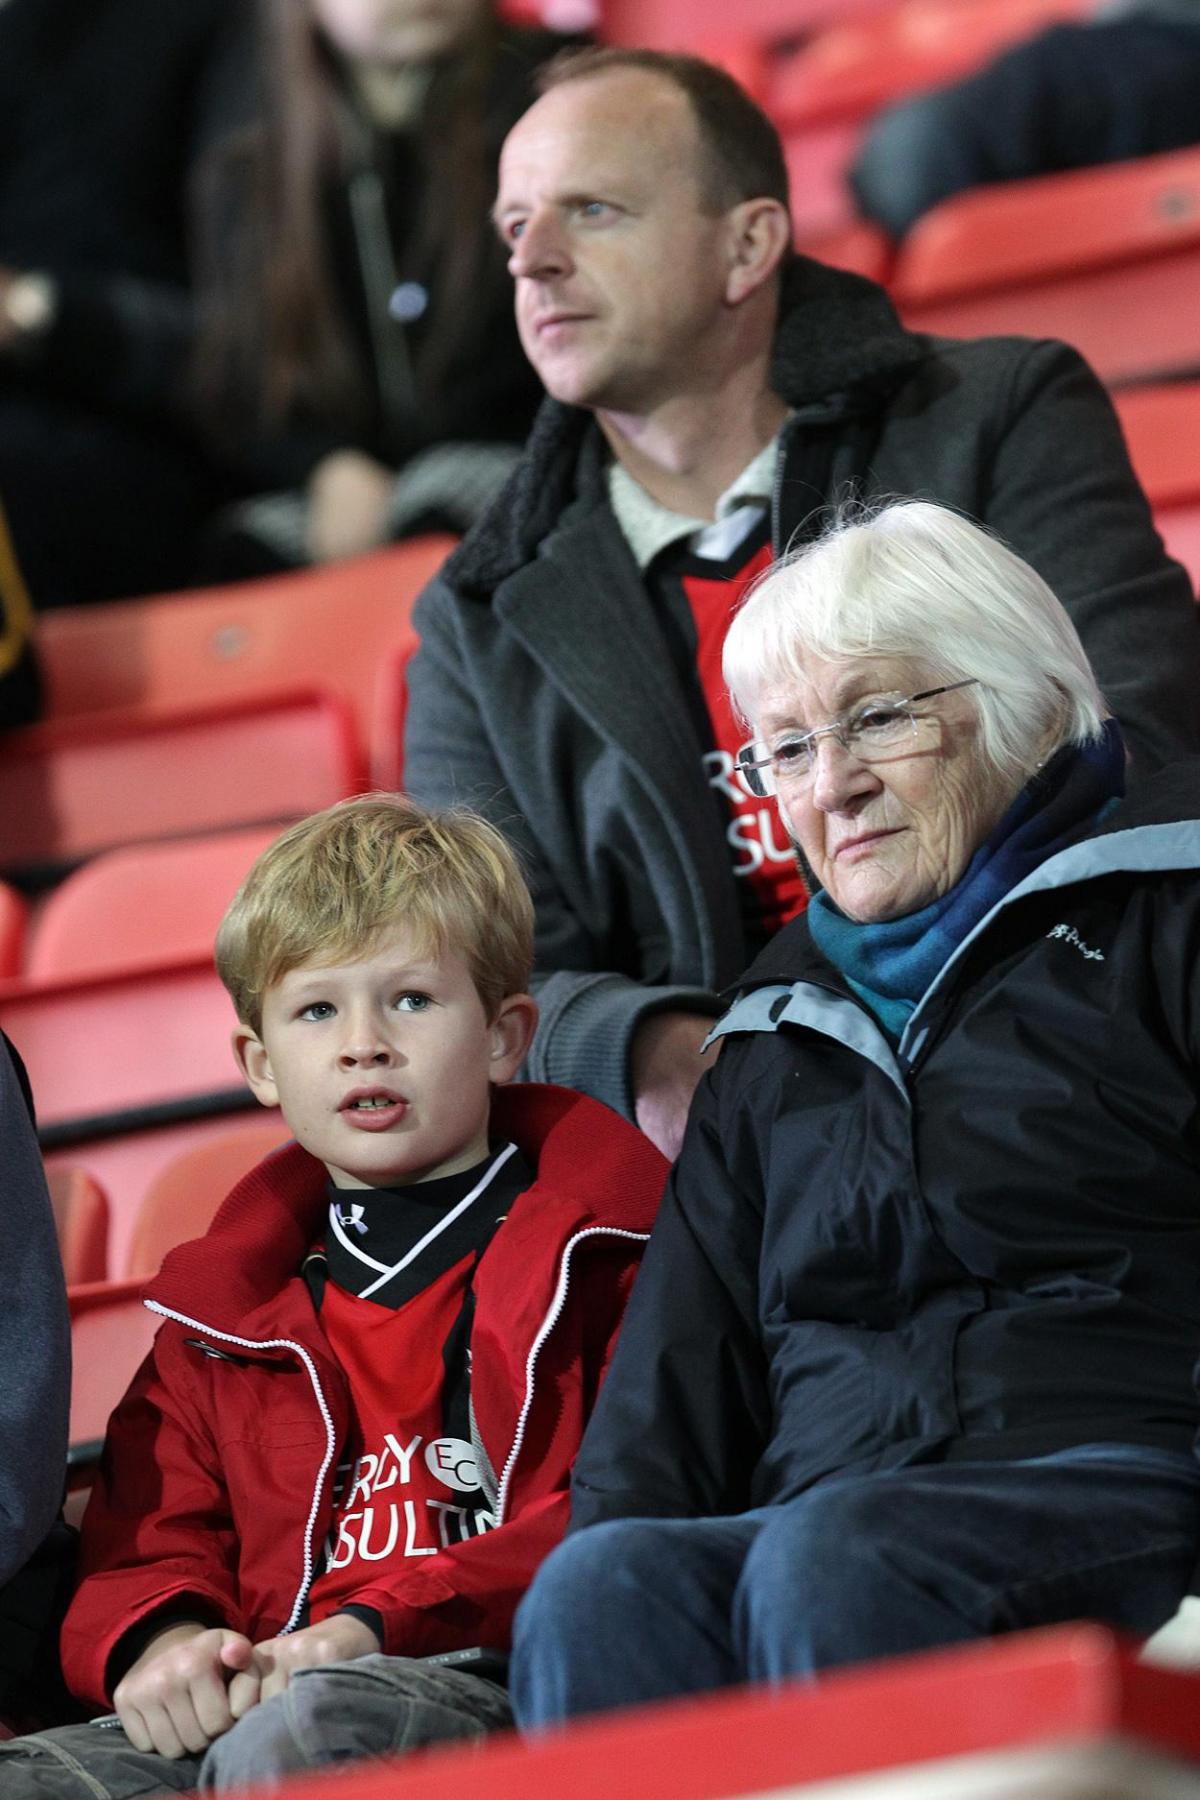 All our pictures from the Cherries v Brighton and Hove Albion game on November 1